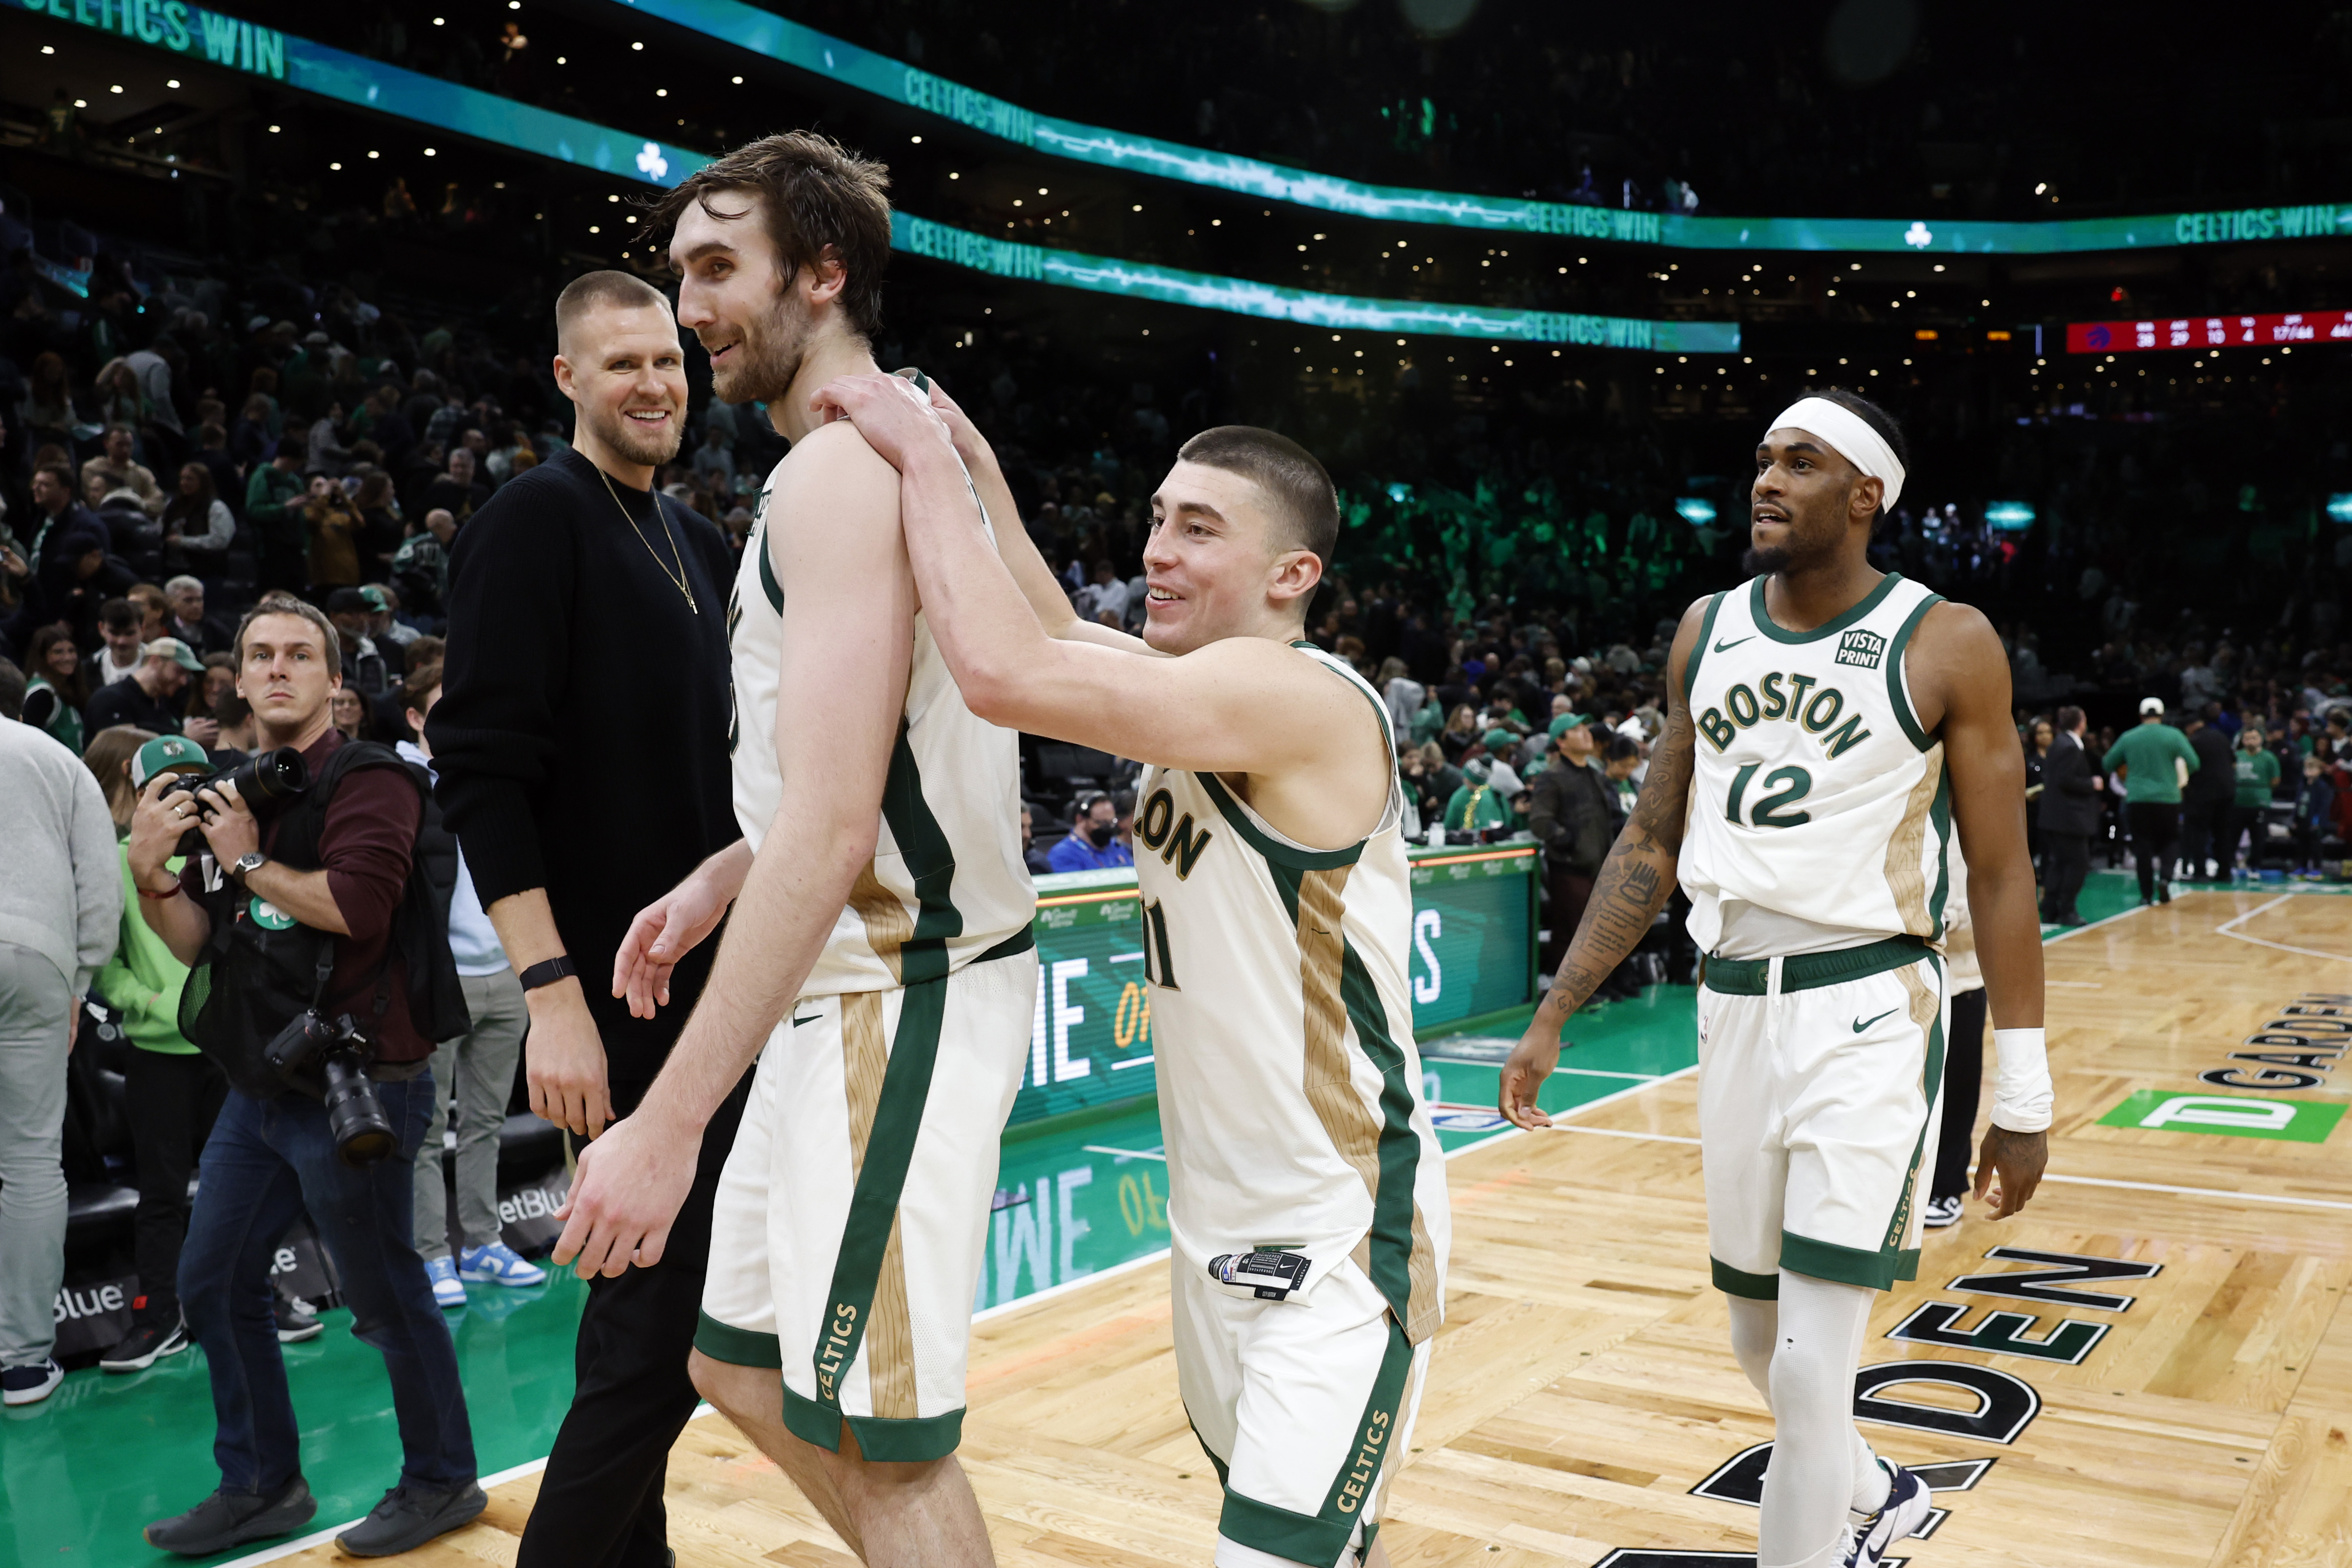 Ultimate teammate' Luke Kornet shows he can really play in addition to cheering on his fellow Celtics - The Boston Globe